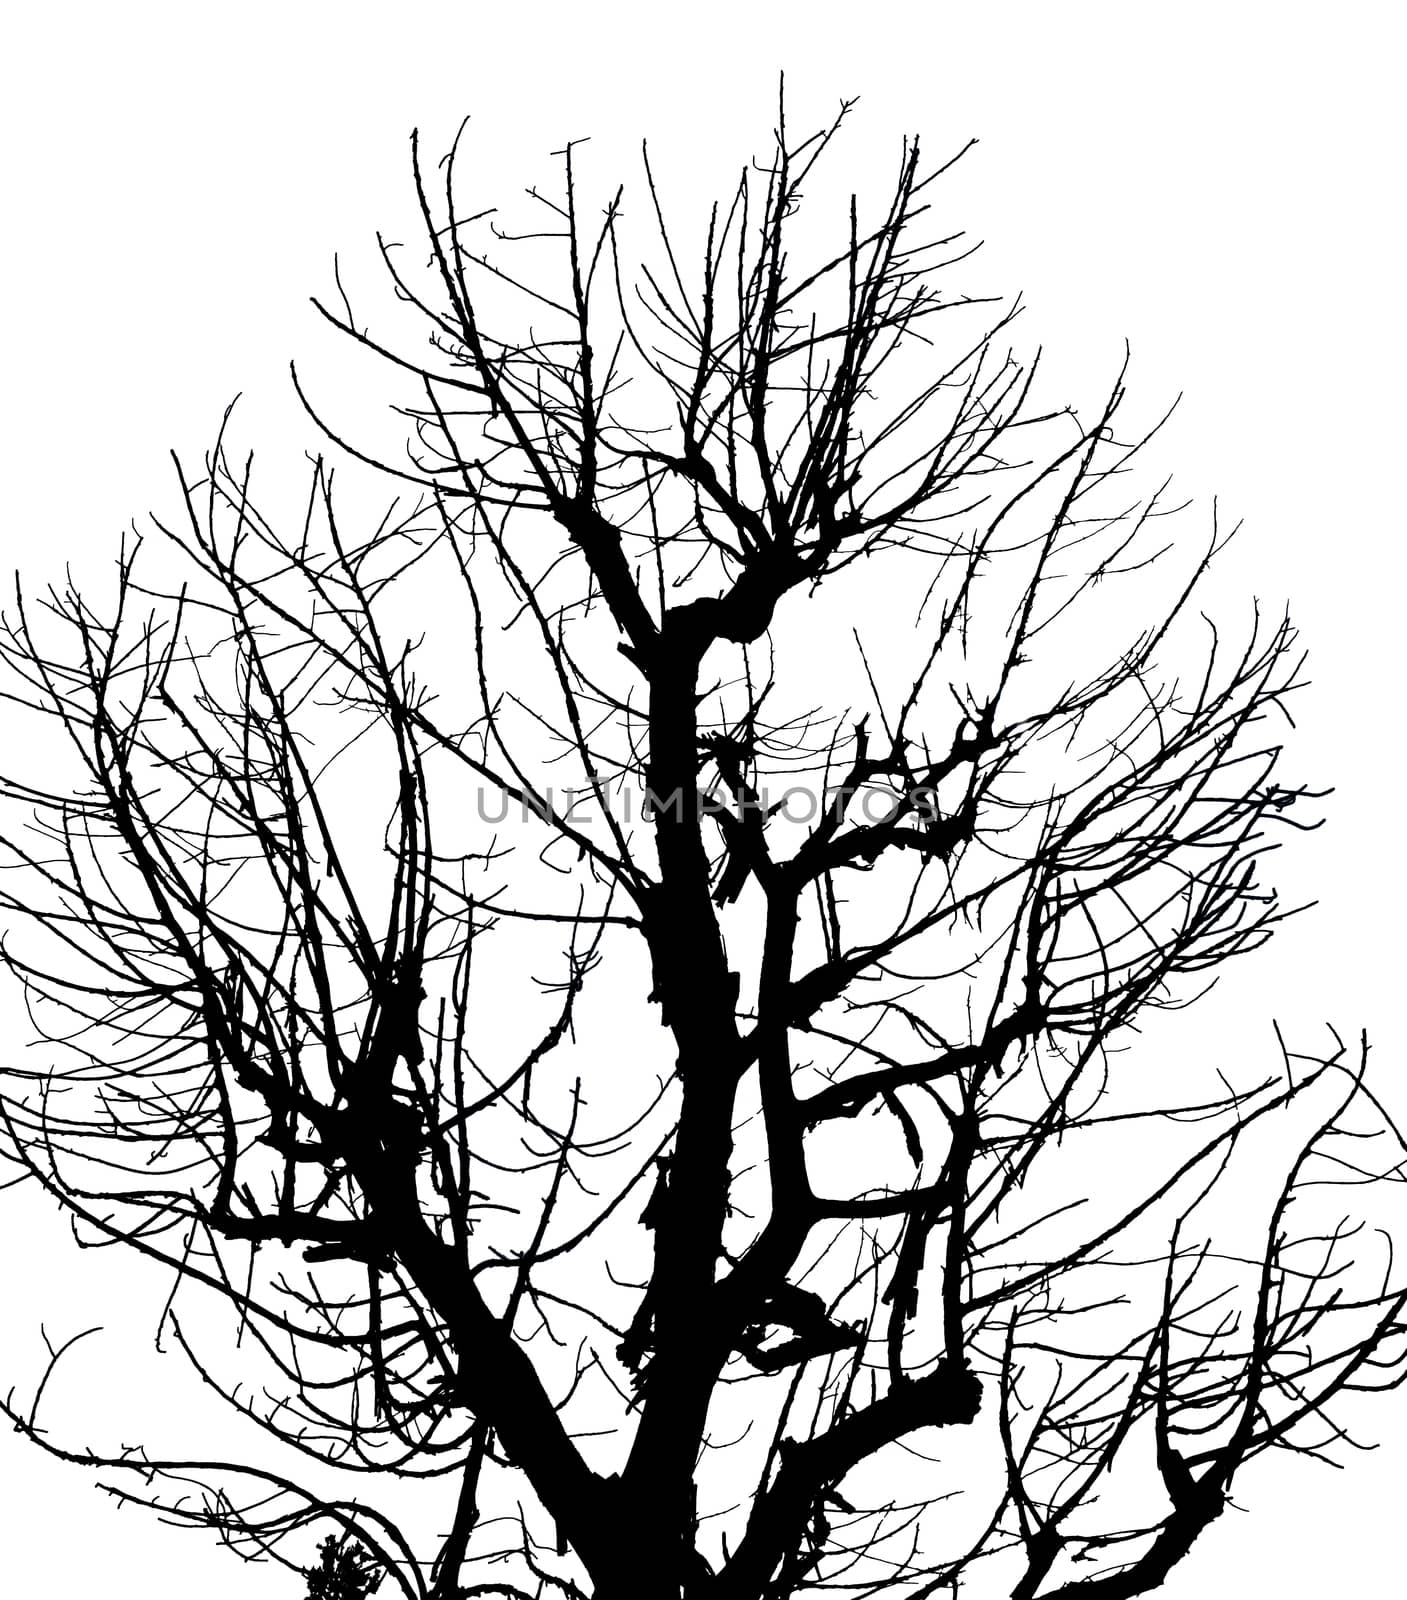 The Silhouette Dead Tree on Isolated White Background.